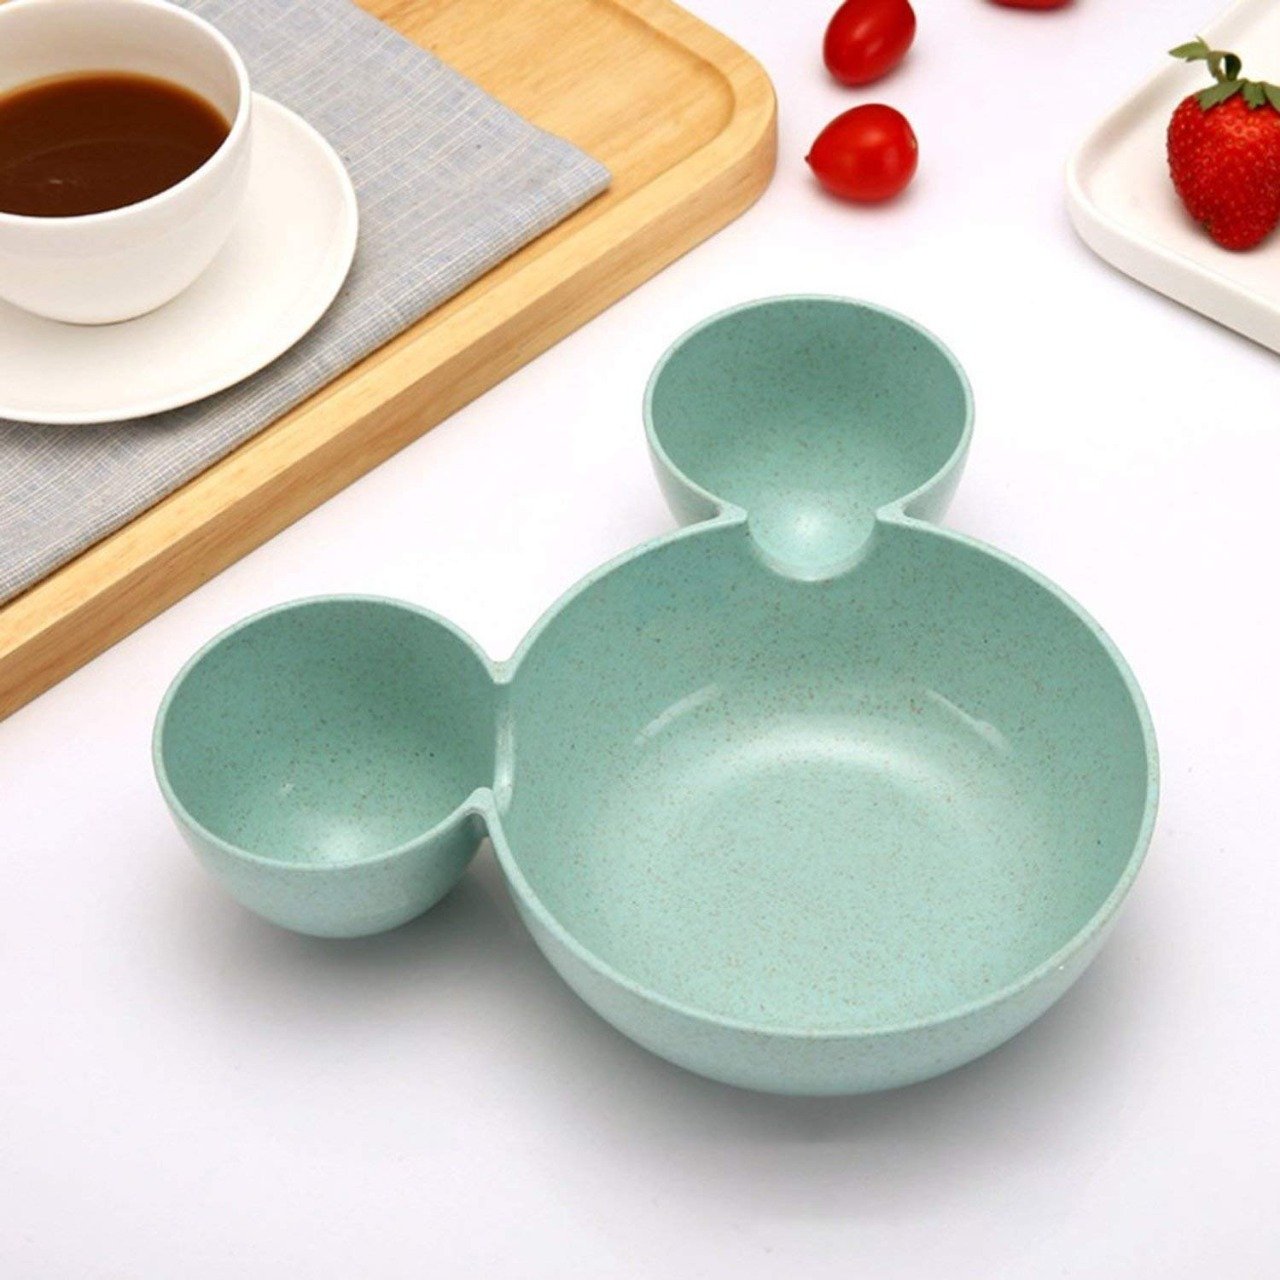 0863 Unbreakable Plastic Mickey Shaped Kids/Snack Serving Plate - SkyShopy